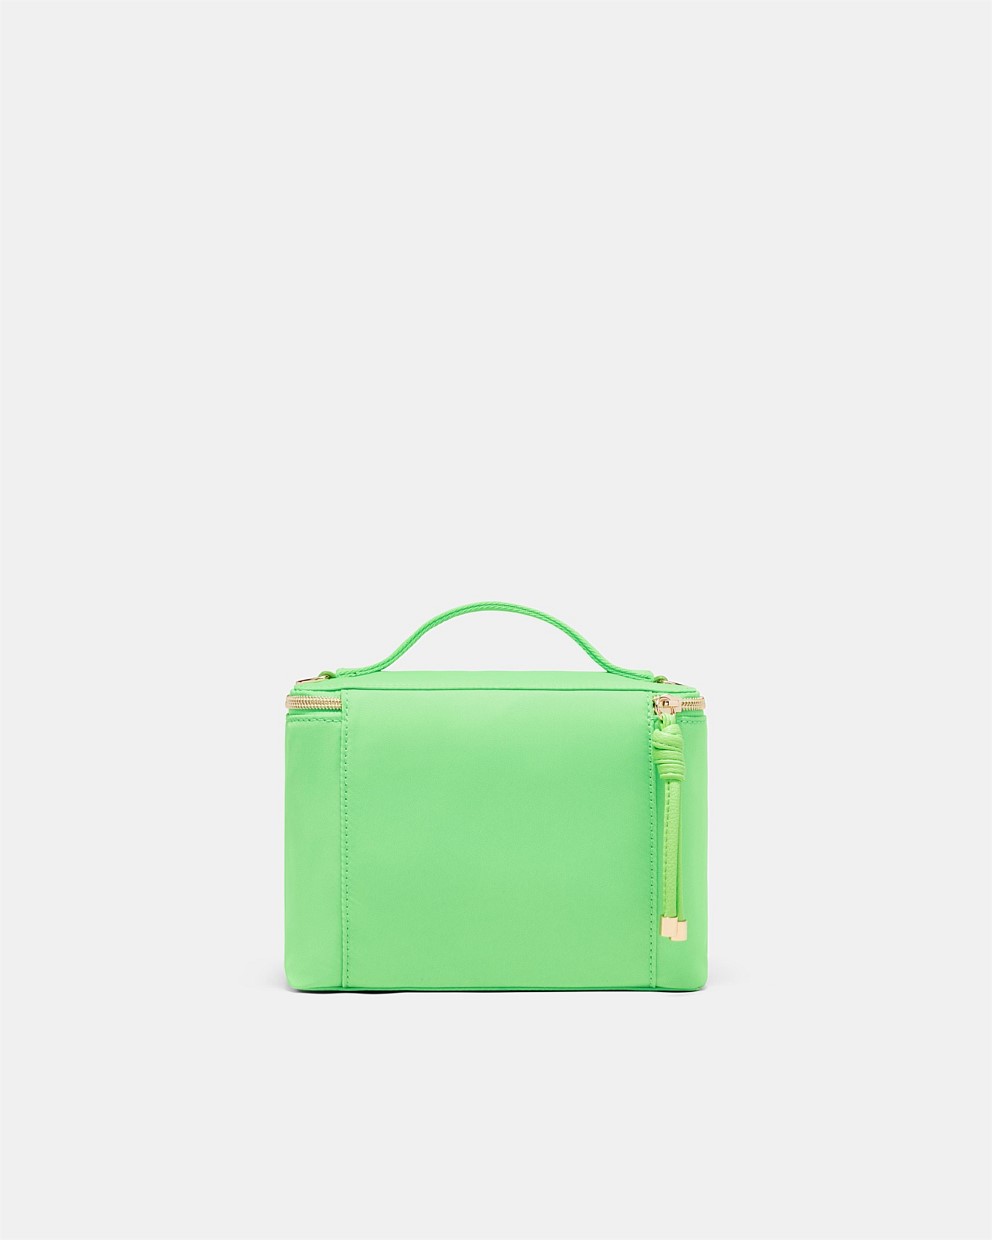 SPICED APPLE NEXTALGIA LUNCHBOX - TRAVEL ACCESSORIES | MIMCO